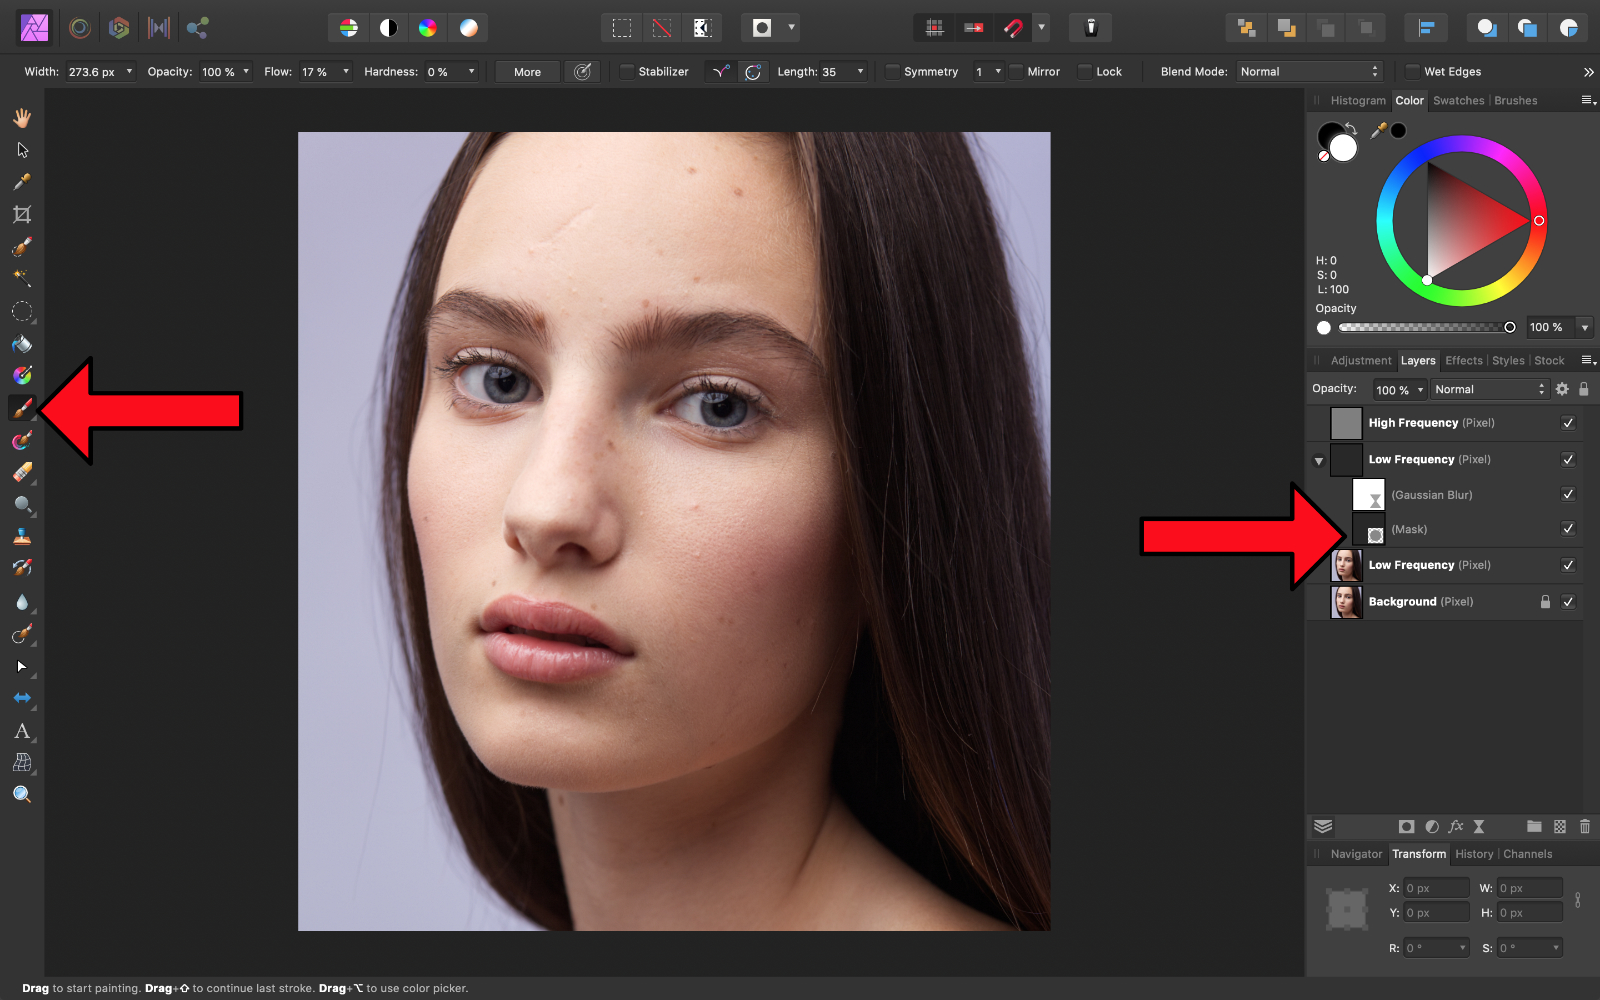 Press Mask icon in Layers panel, select Paint Brush